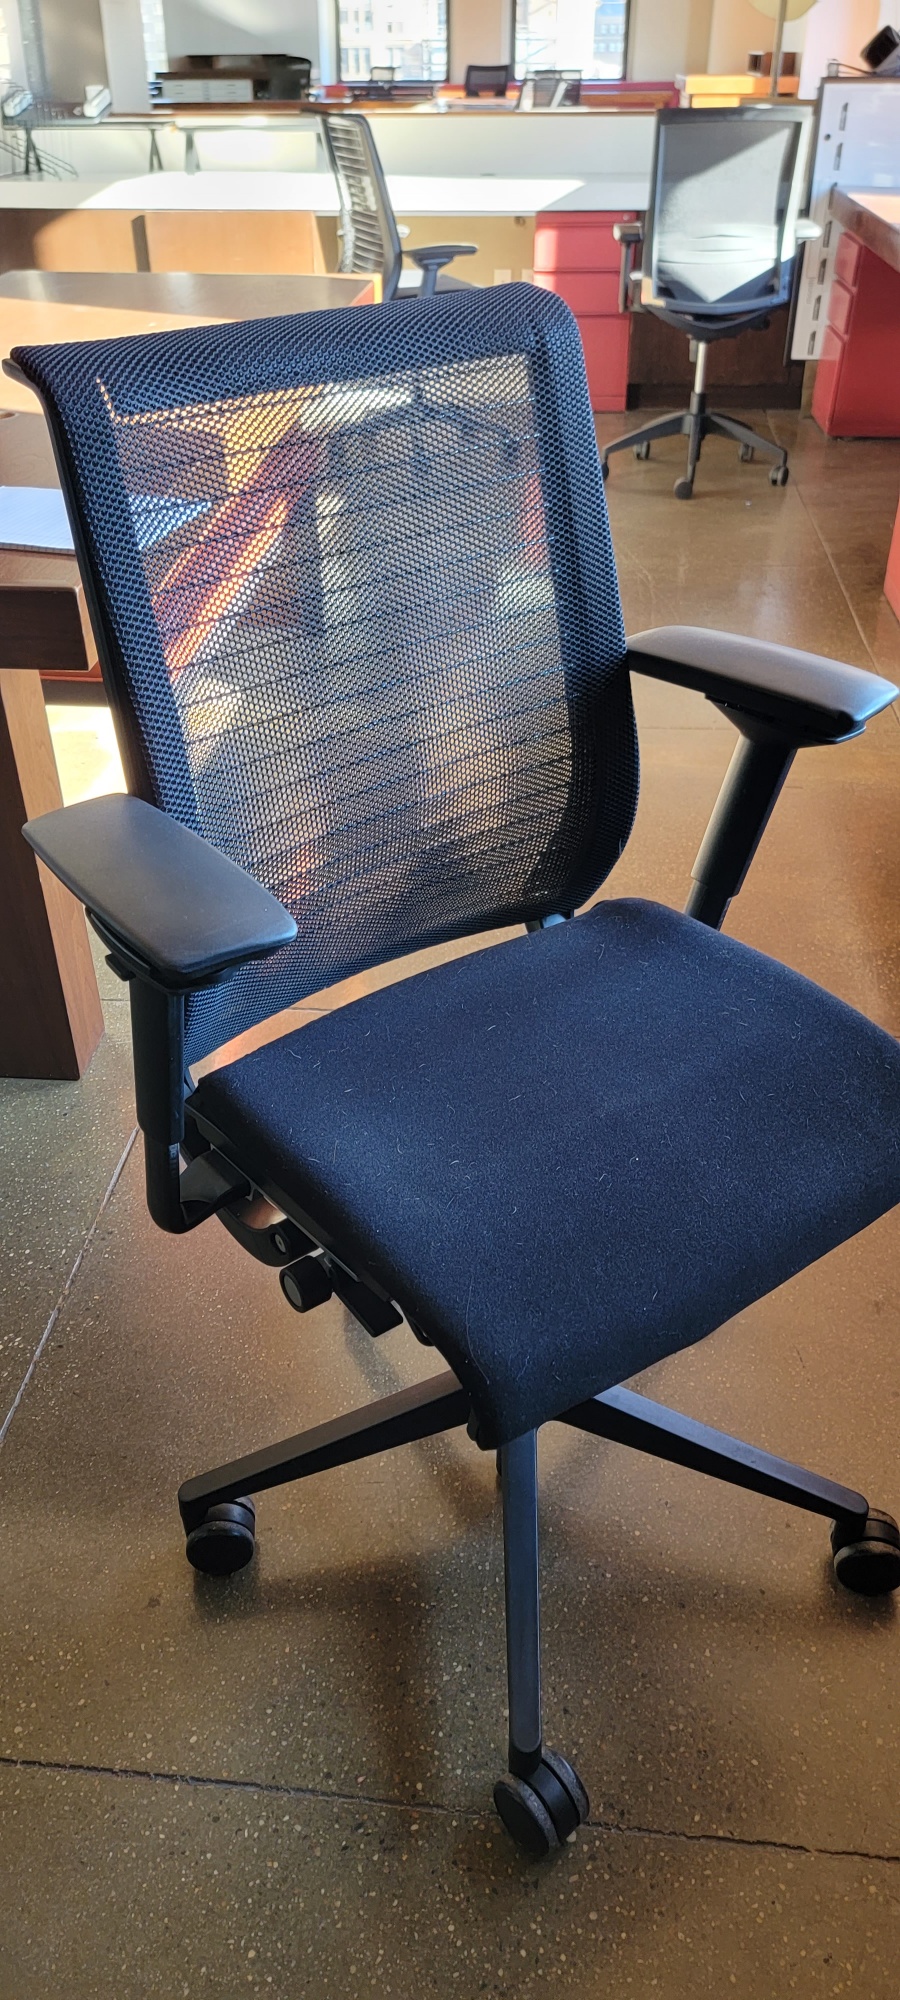 C61696 - Steelcase Think Chairs